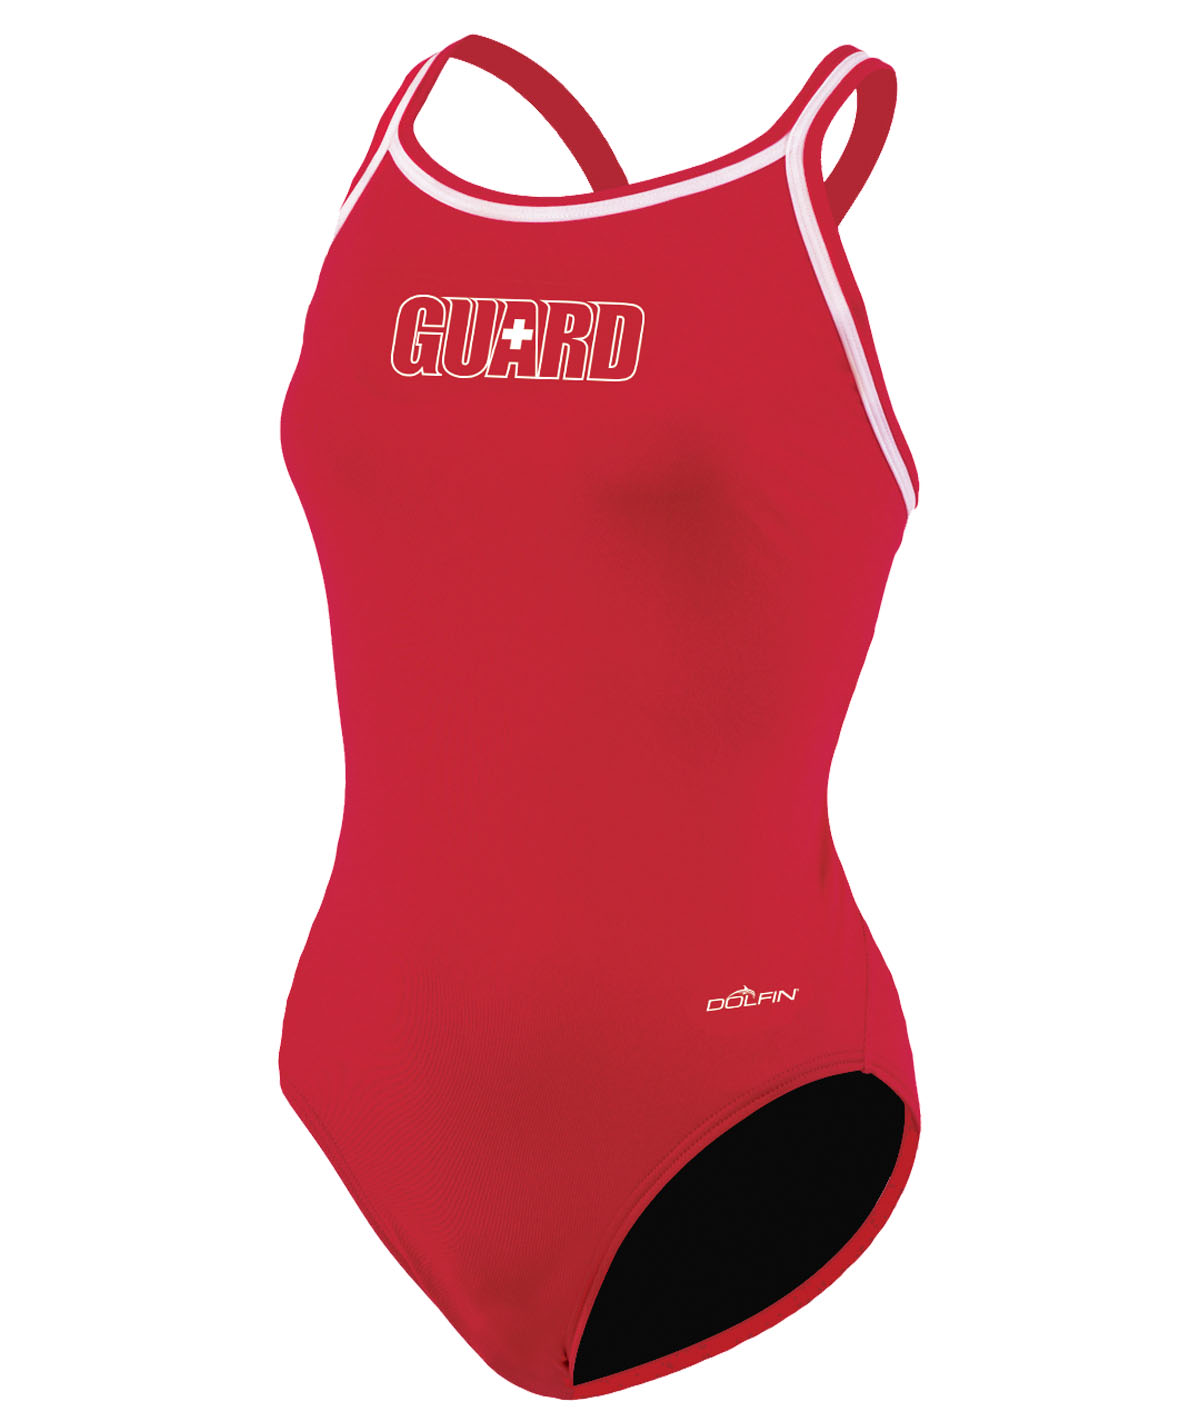 Women's Reliance Solid Guard DBX Back One Piece Swimsuit